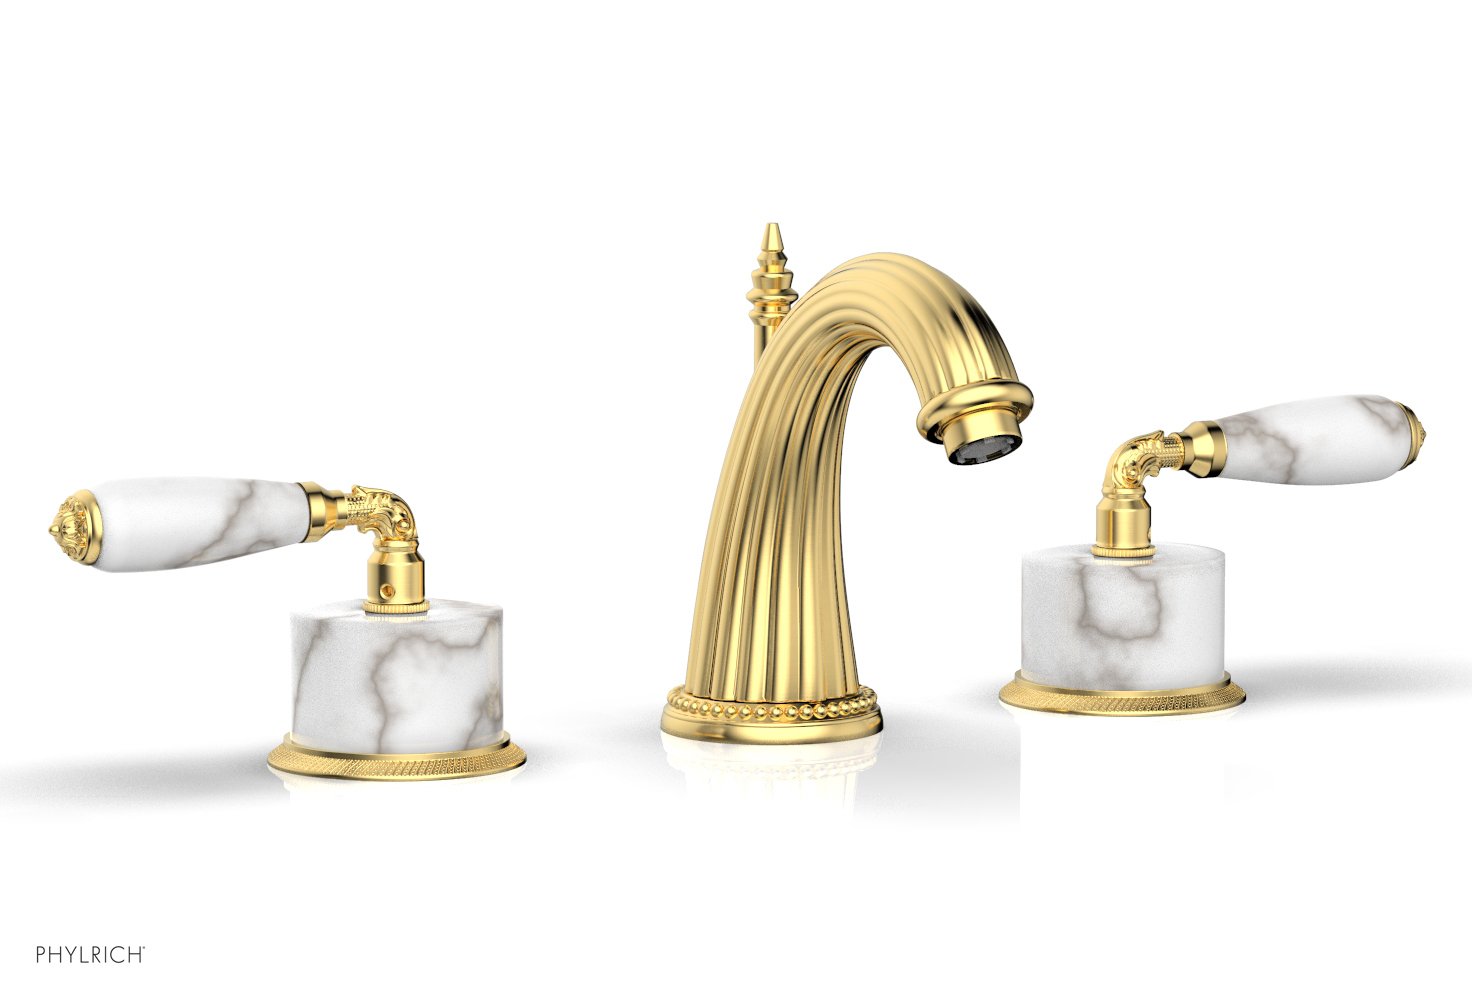 Phylrich VALENCIA Widespread Faucet White Marble